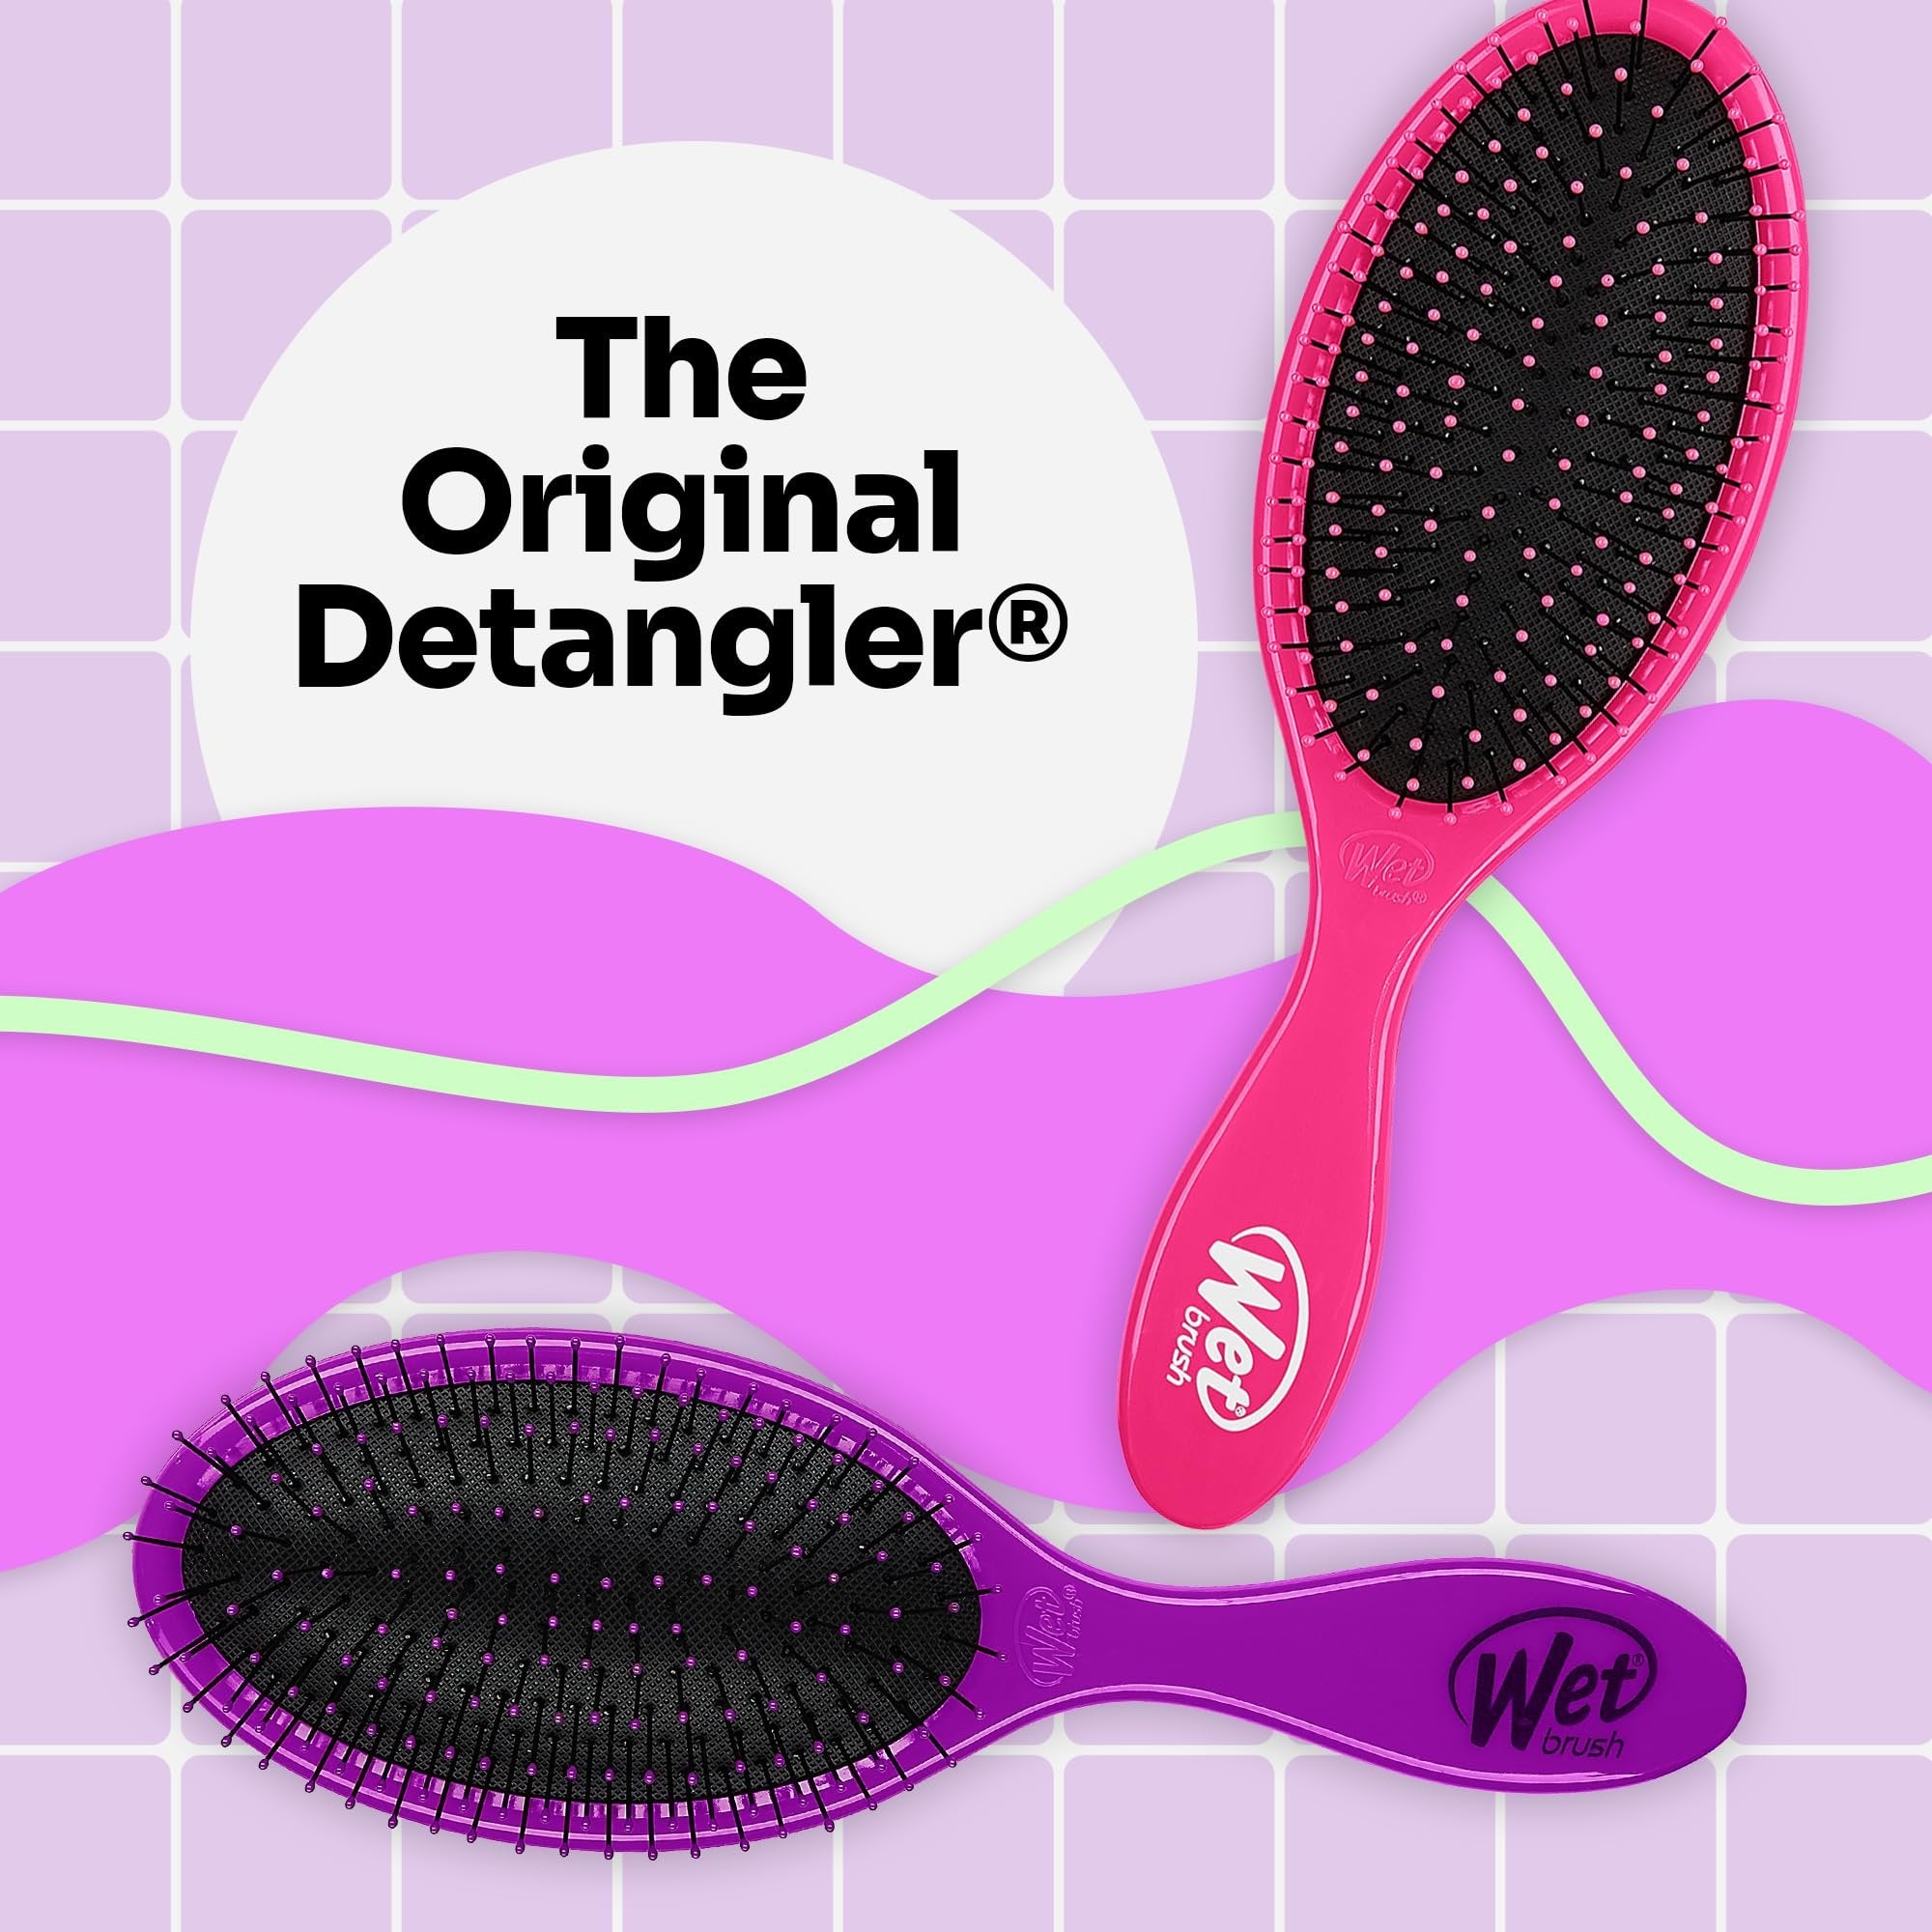 Wet Brush Original Detangler Hair Brush - Pink And Purple - Exclusive Ultra-soft IntelliFlex Bristles - Glide Through Tangles With Ease For All Hair Types - For Women, Men, Wet And Dry Hair 2 Count